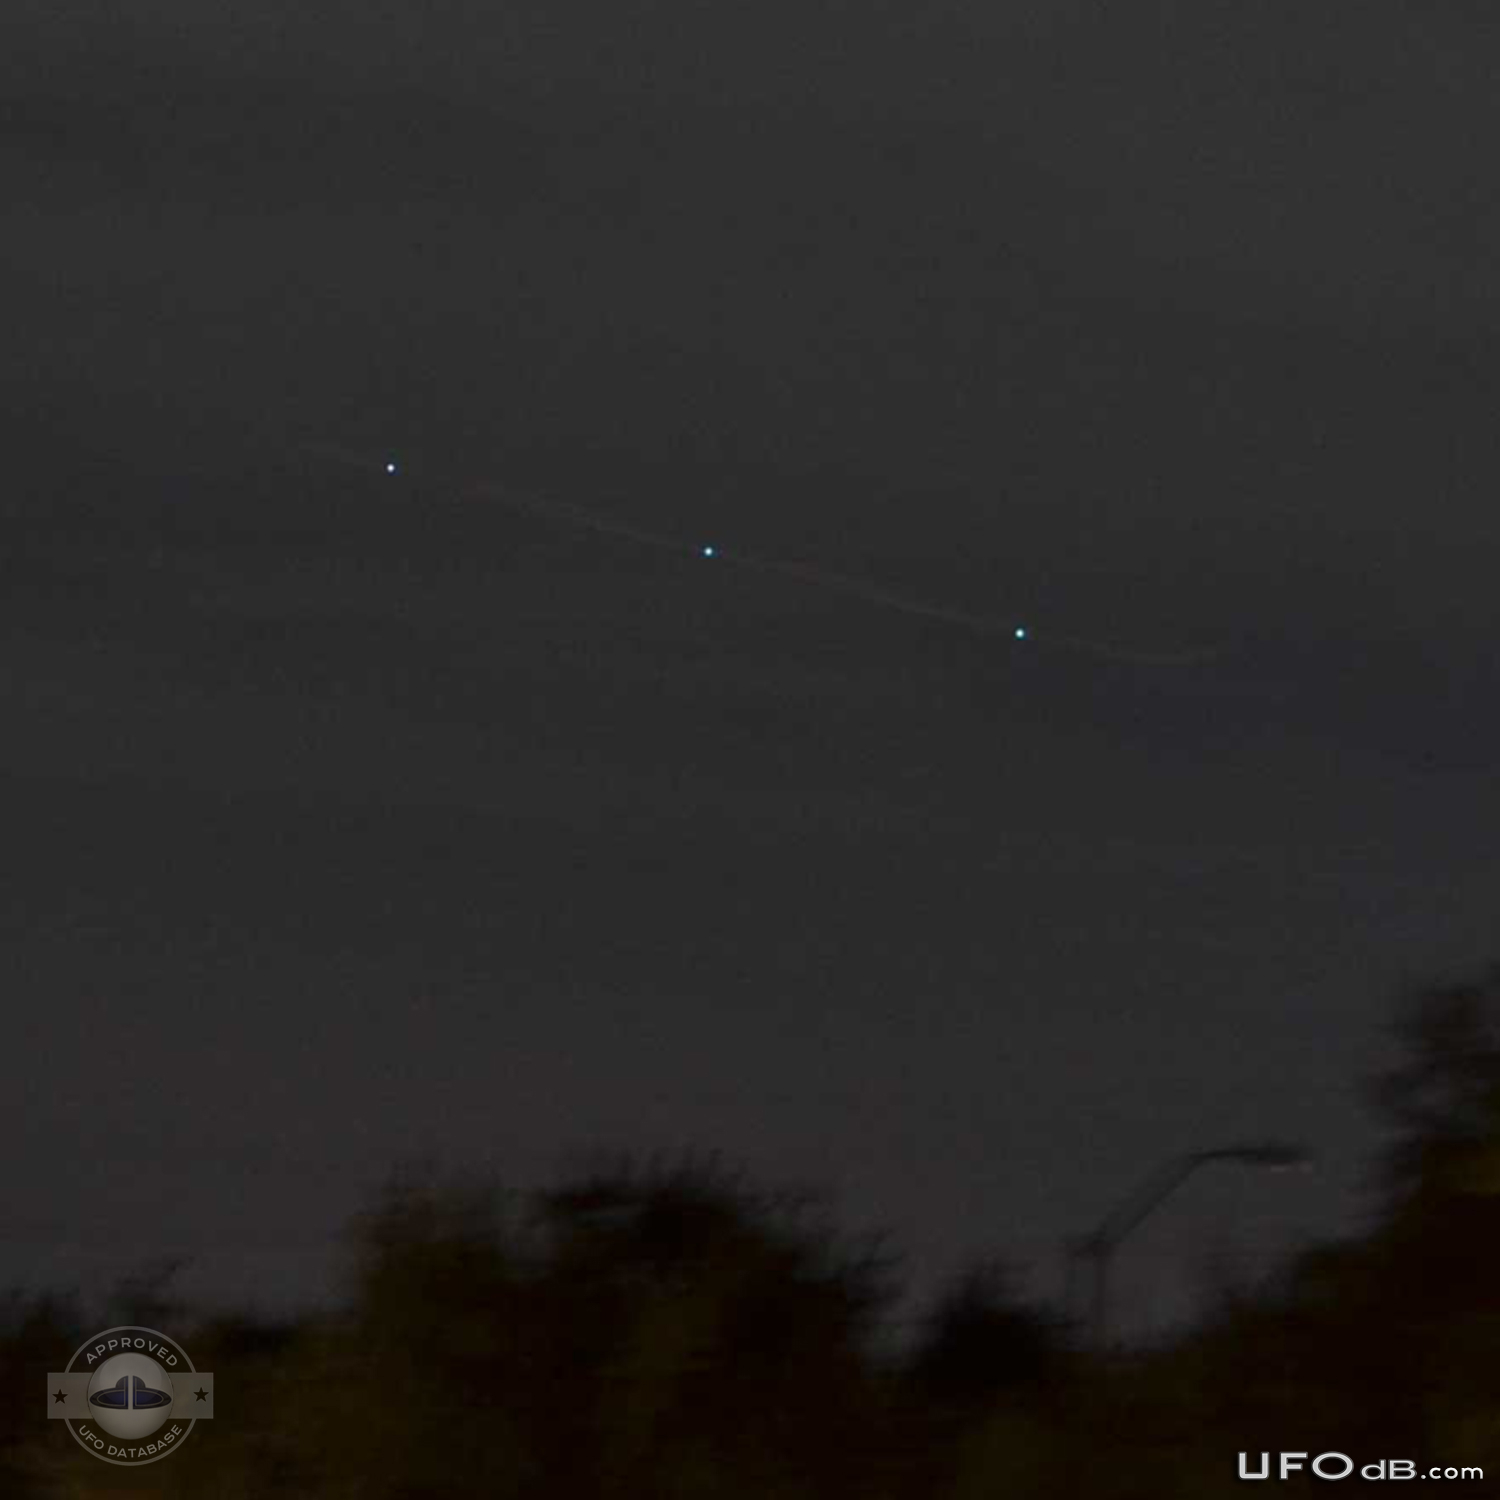 UFOs are showing on 2011 Christmas pictures - Dallas, Texas - 2011 UFO Picture #390-5